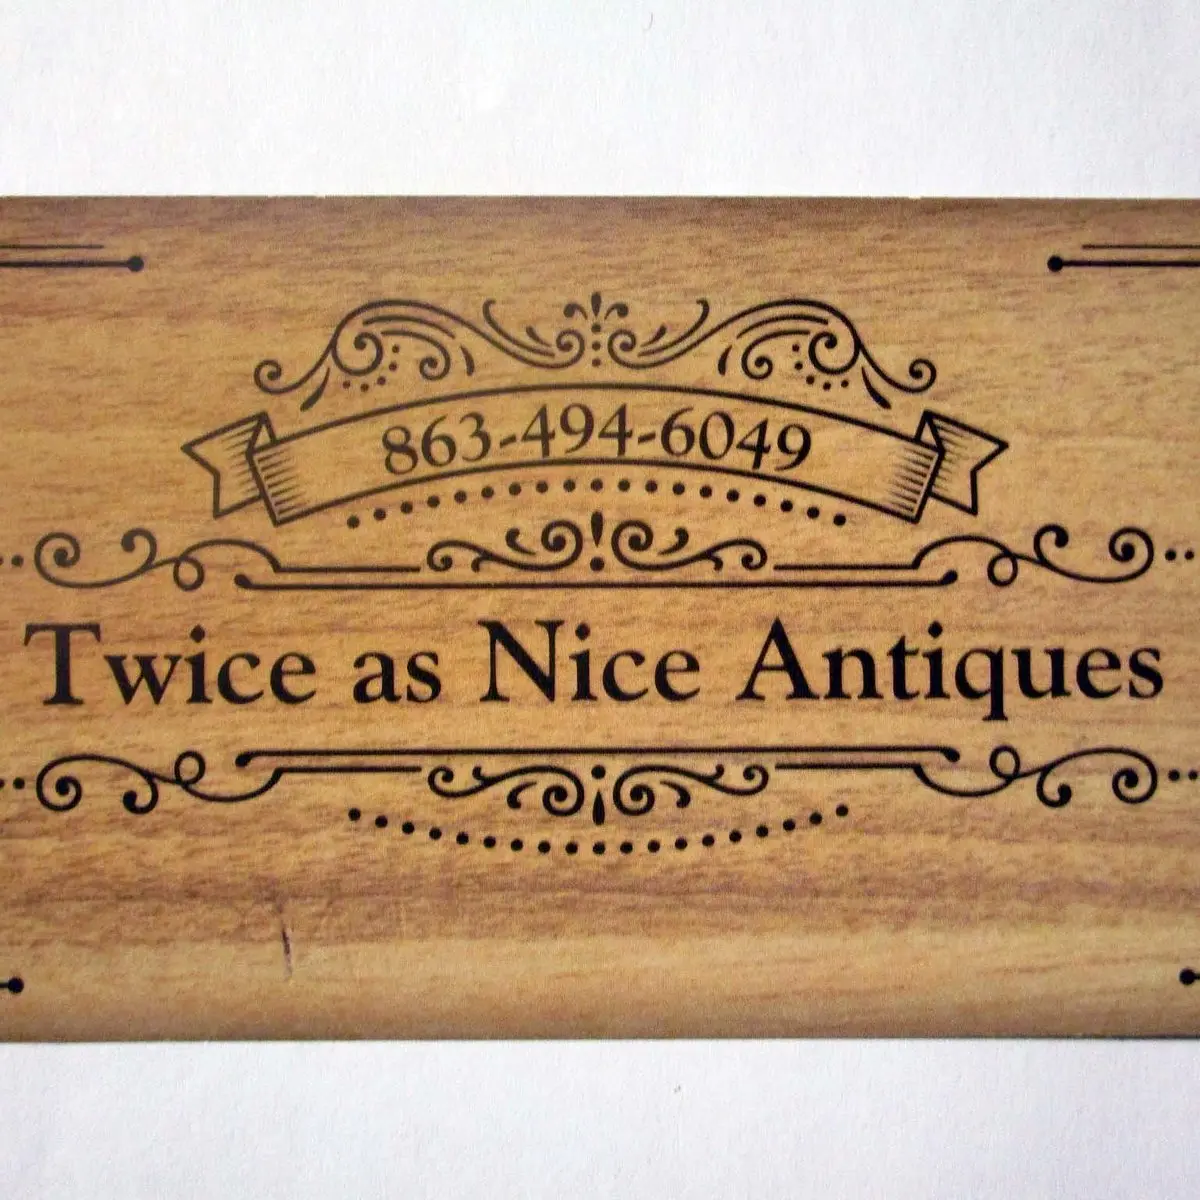 Twice as Nice Antiques